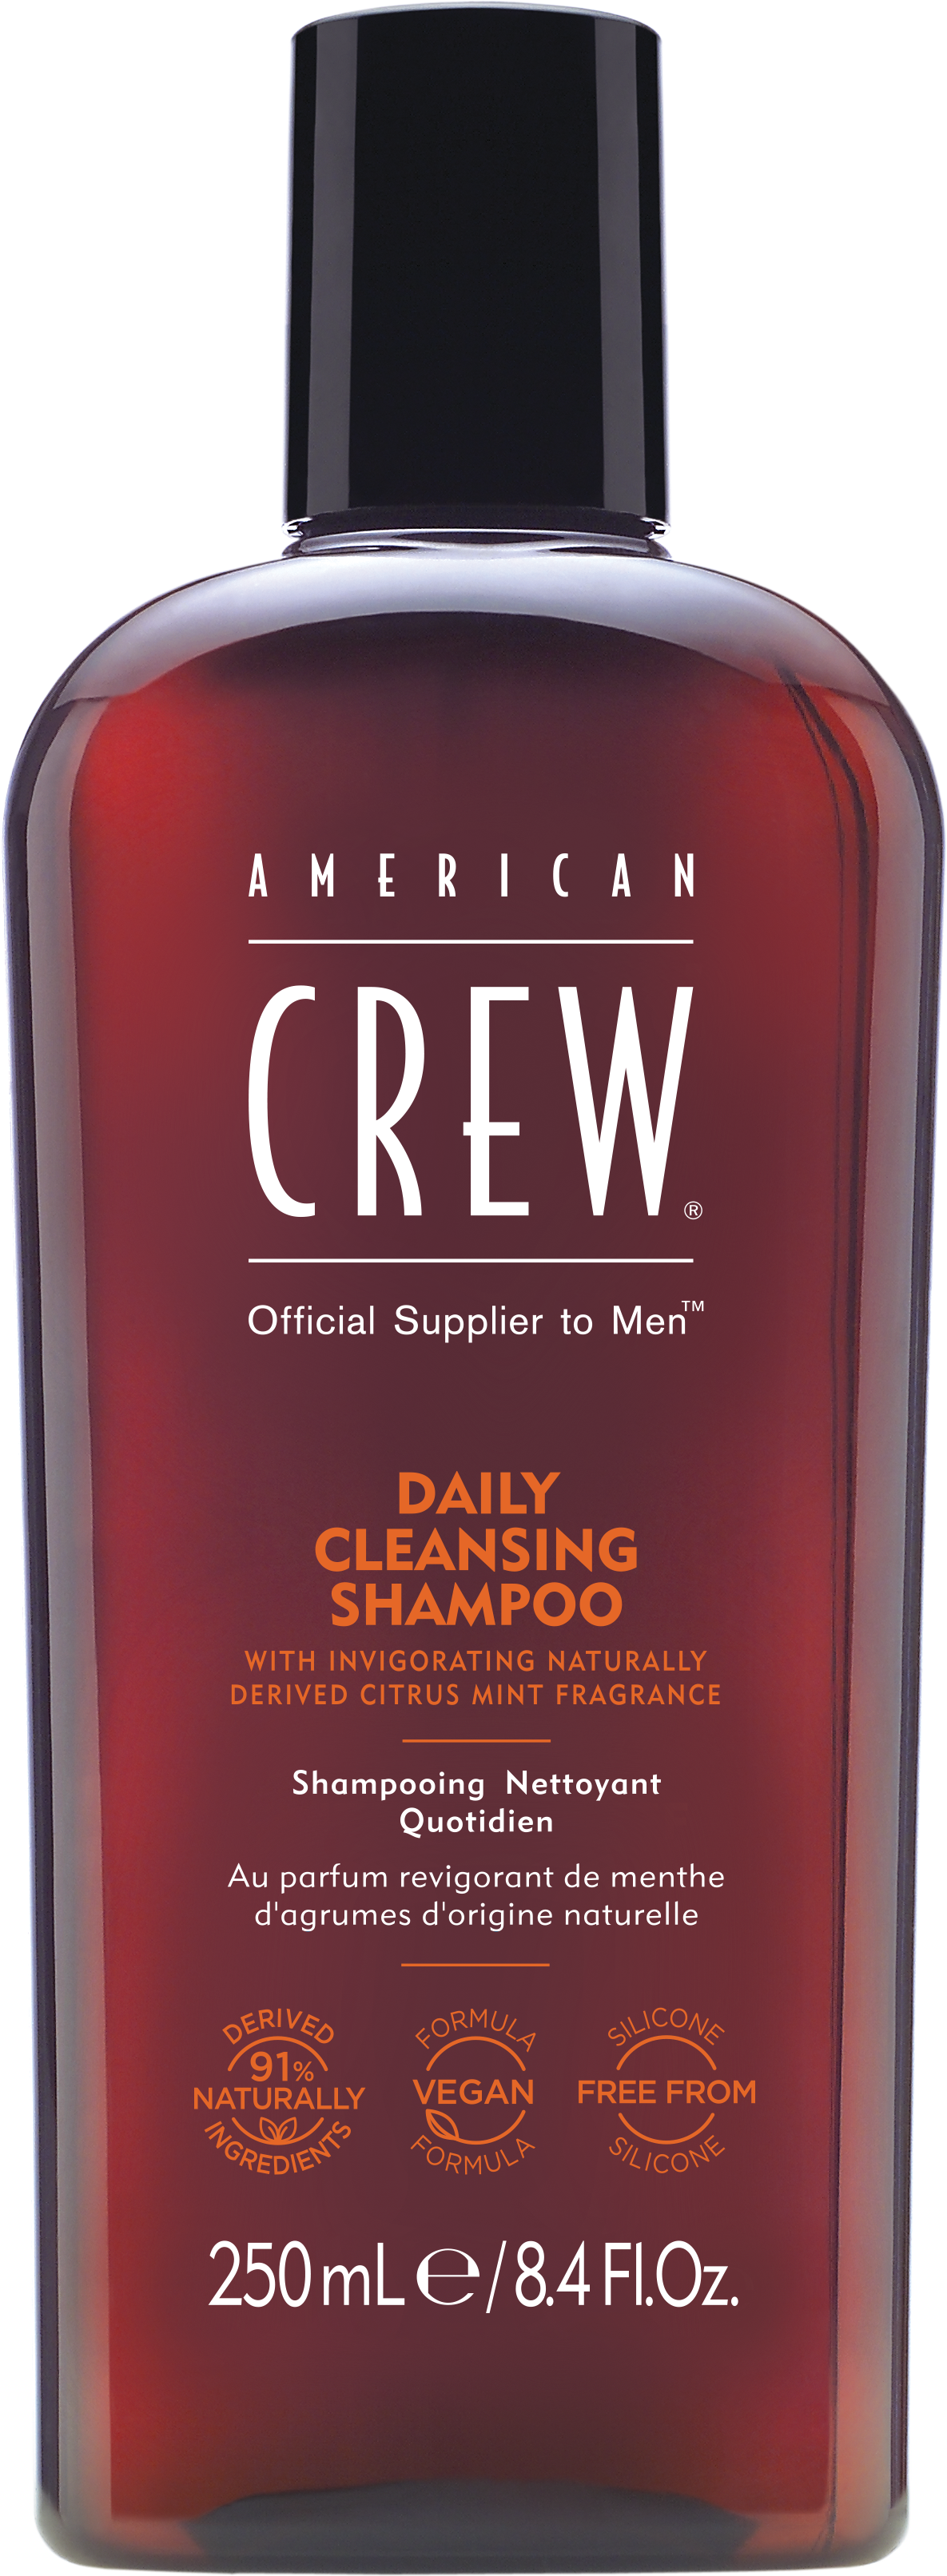 Daily Cleansing Shampoo